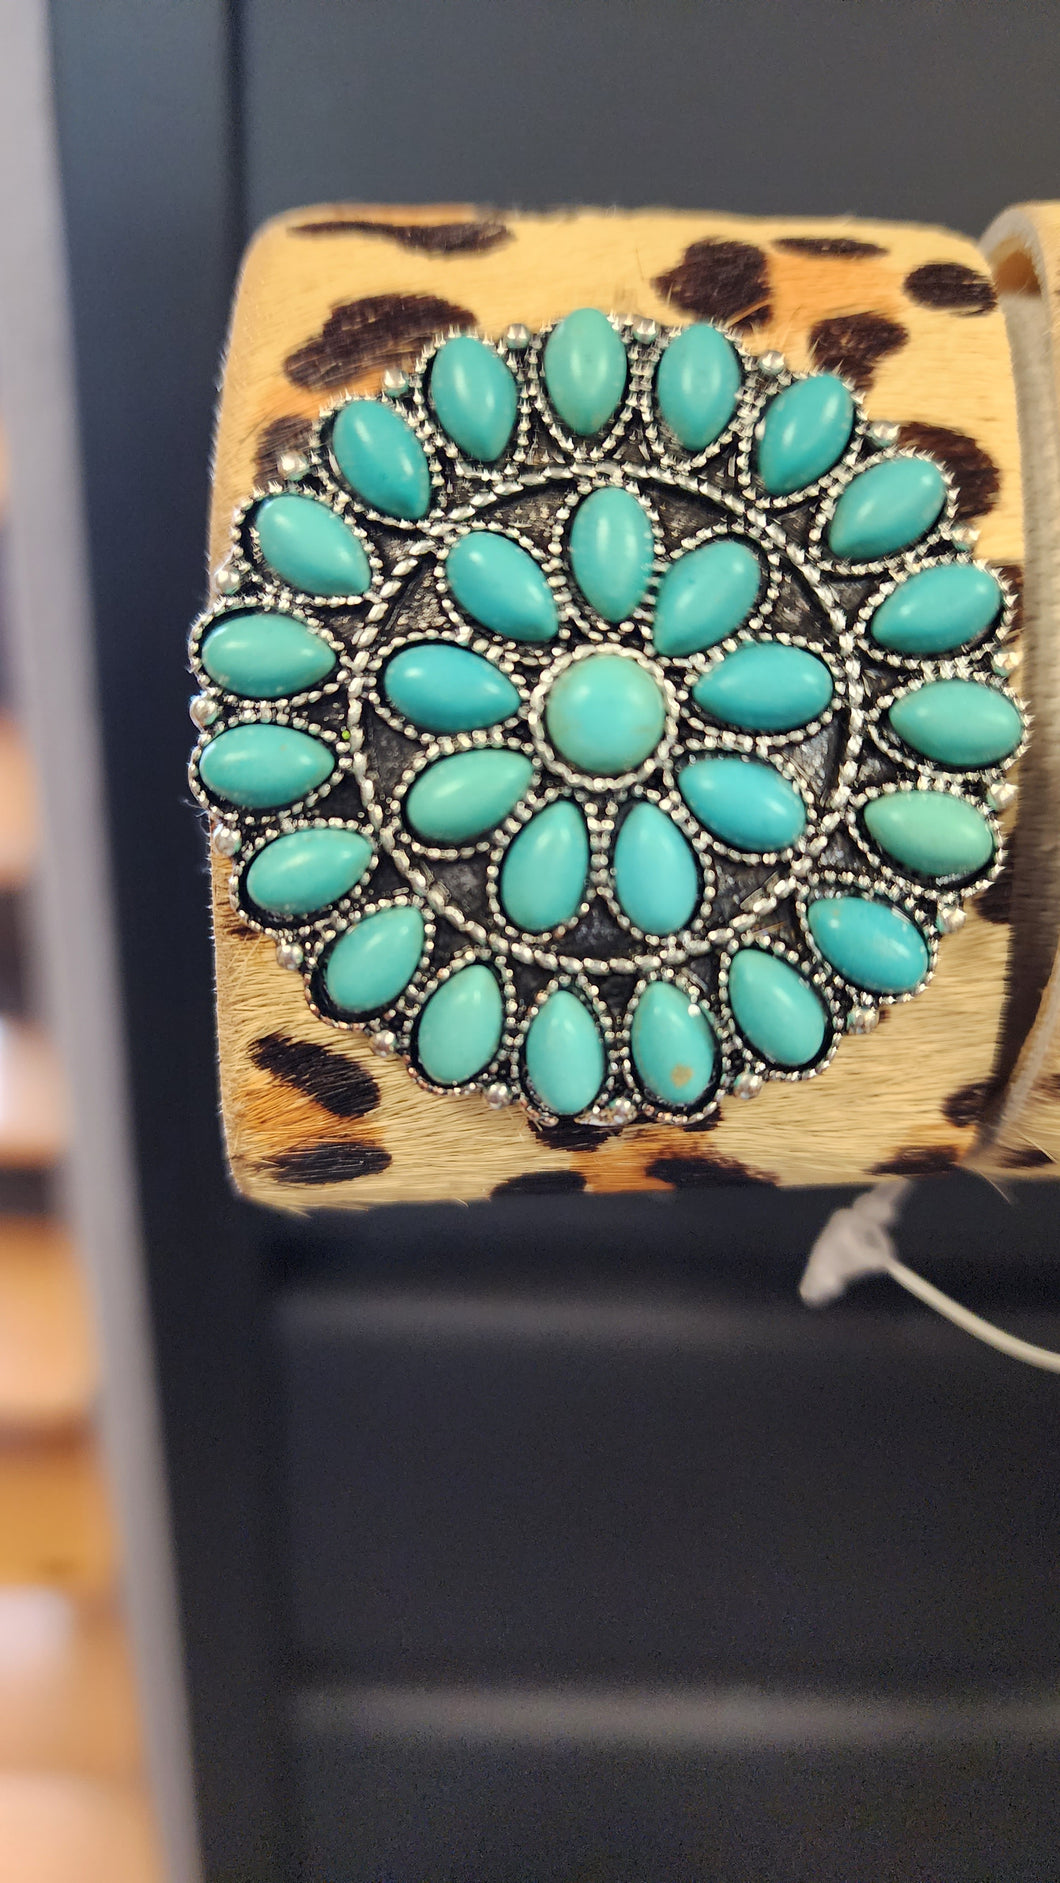 LEOPARD SUEDE CUFF BUTTON BRACELET WITH A TURQUOISE CIRCULAR FLOWER STONE 02431